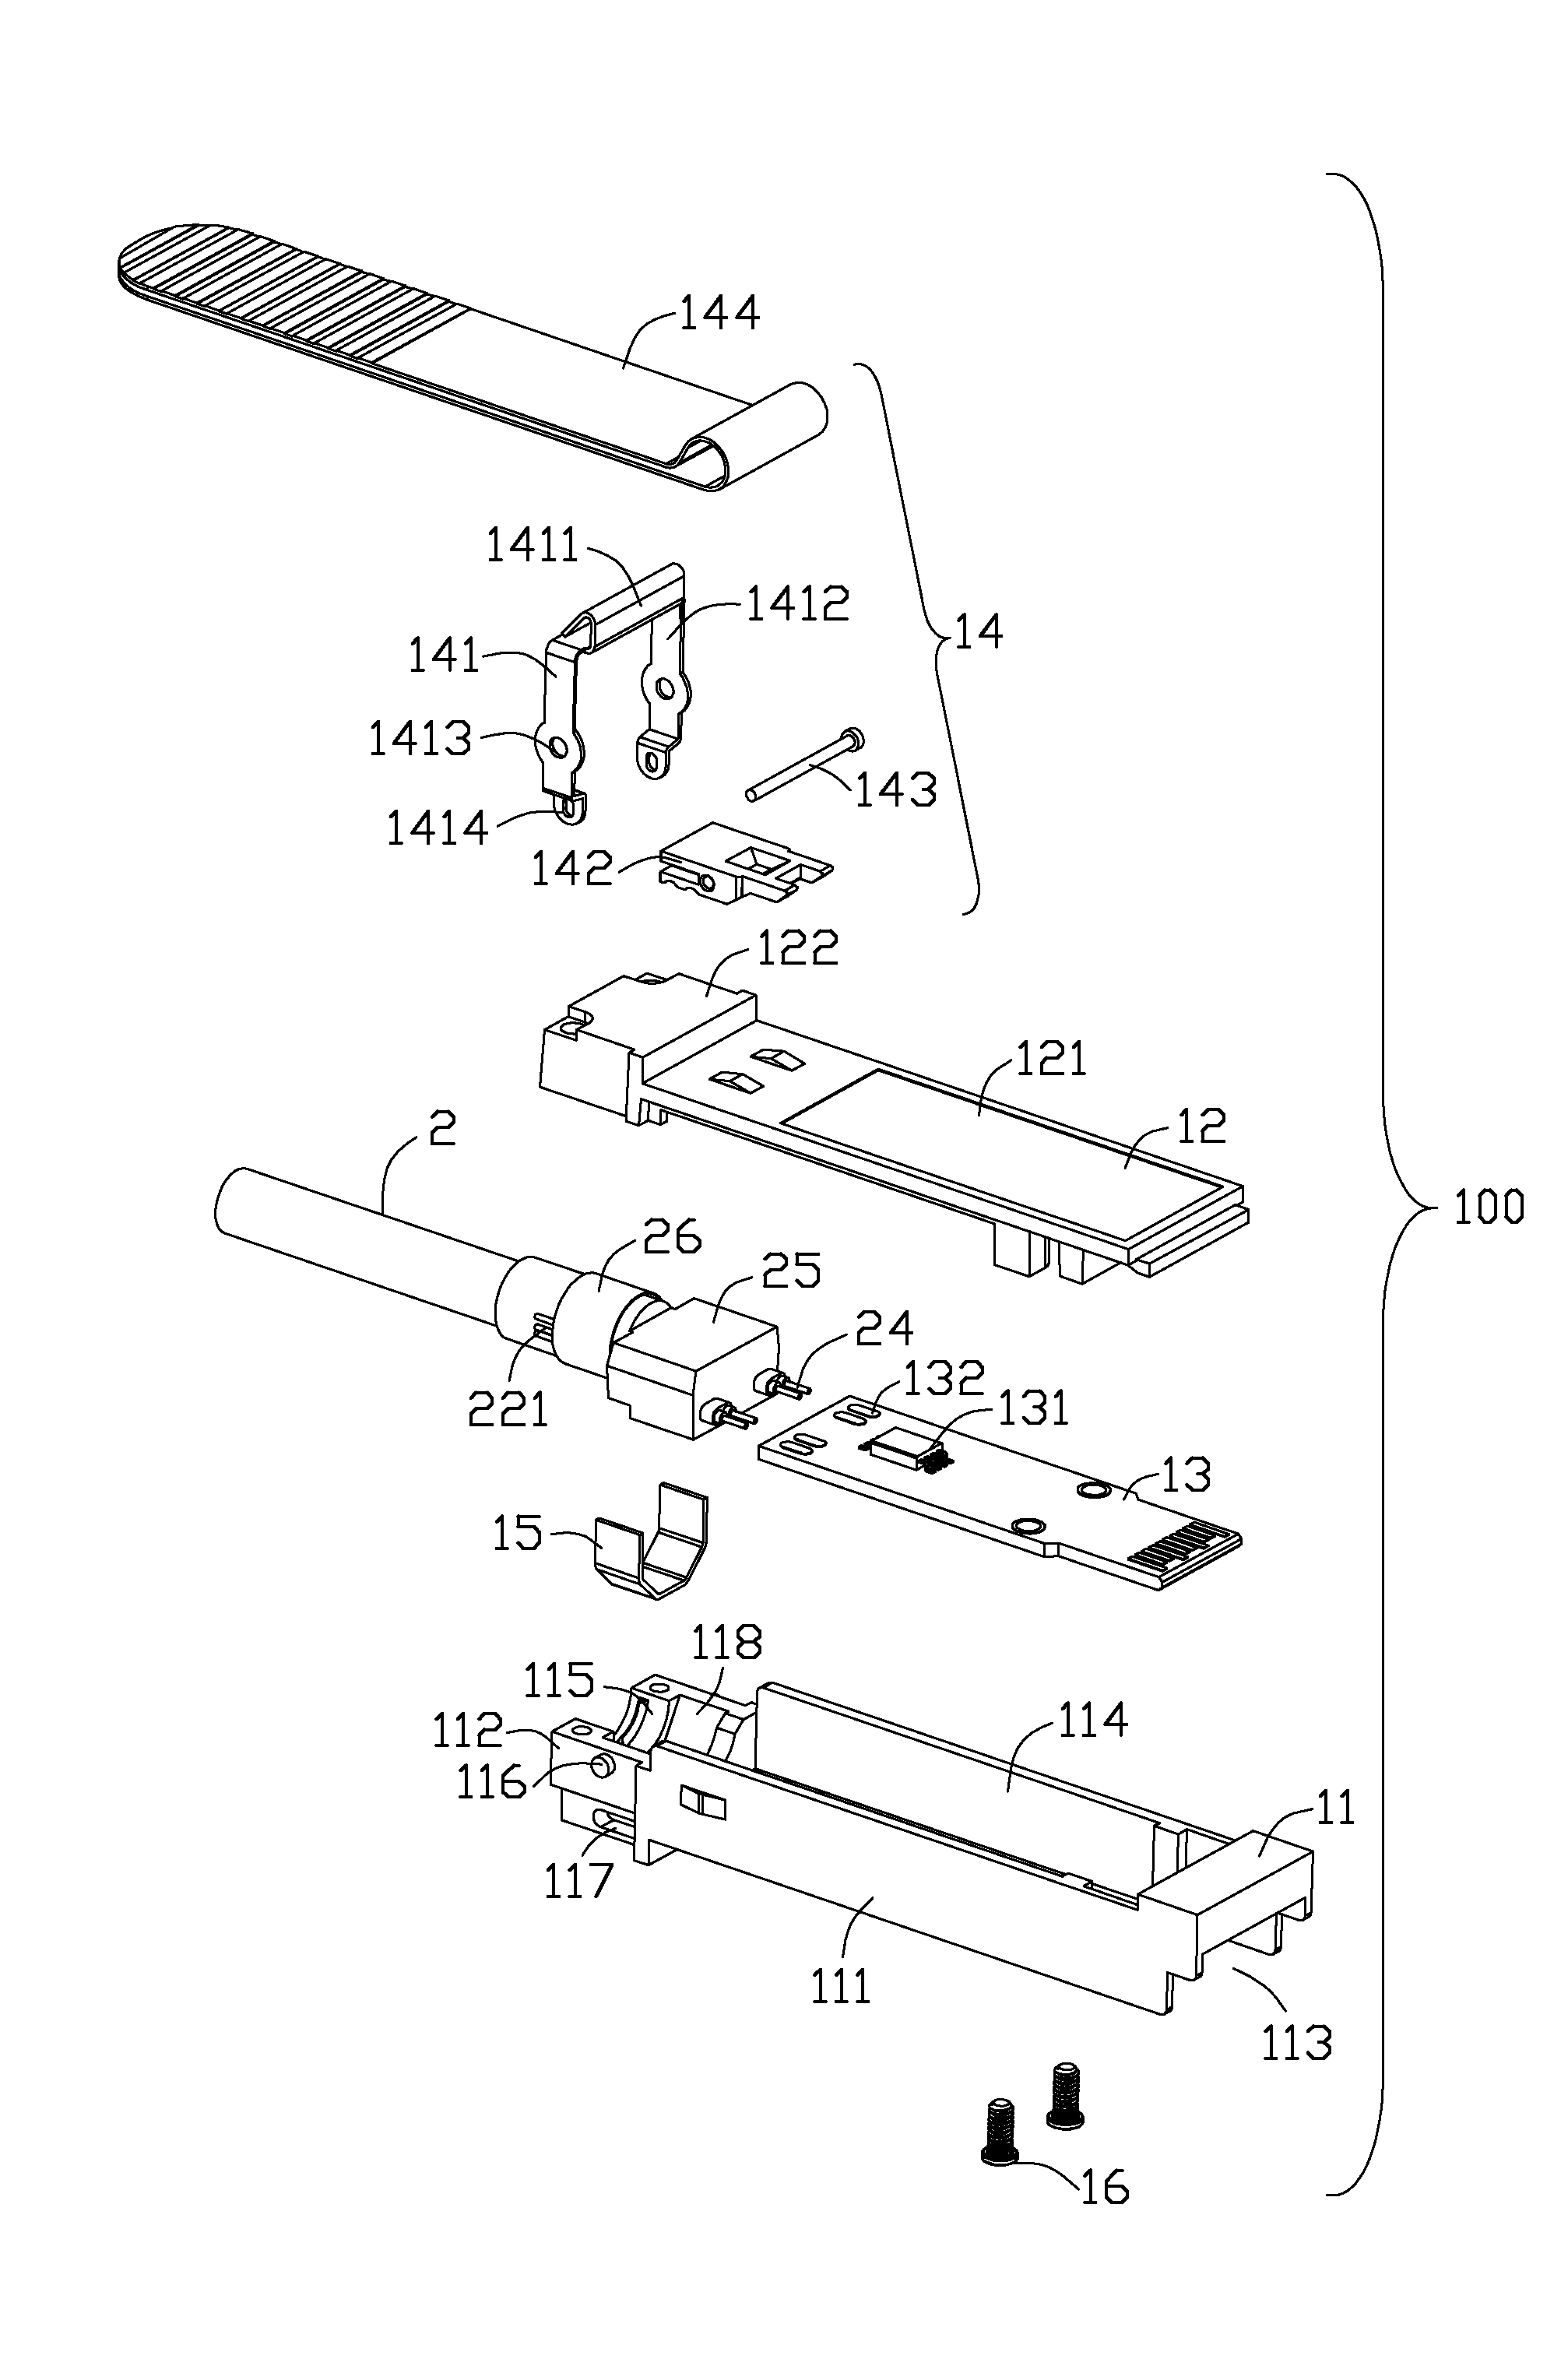 Cable assembly having improved insulative holding device and method for making the same